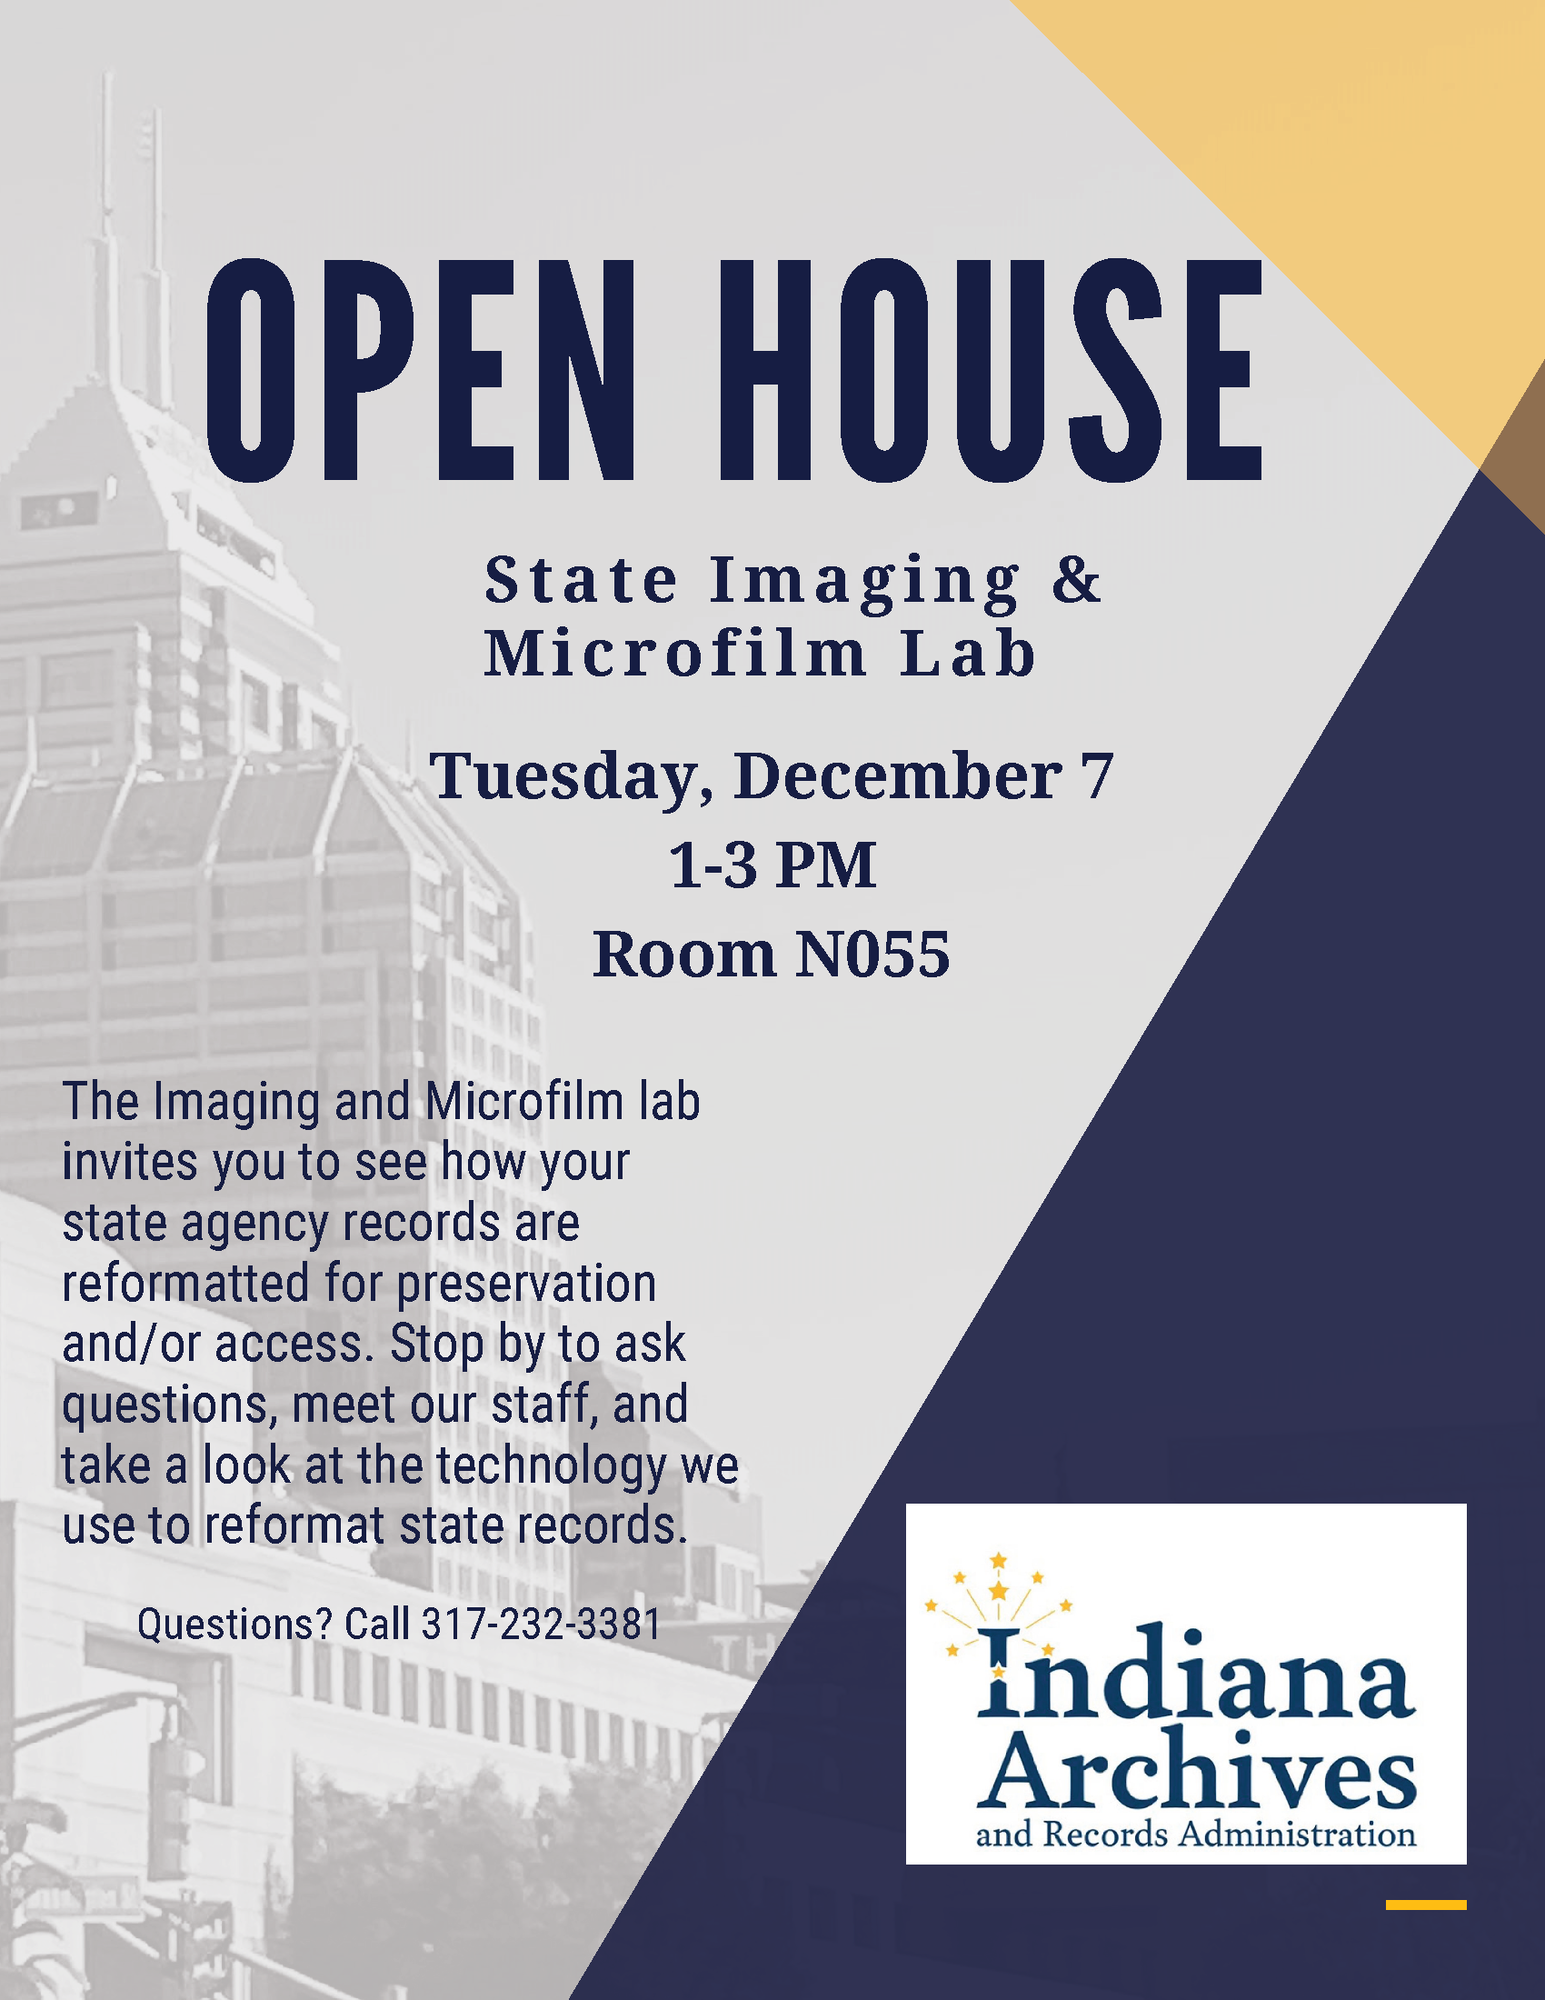 Indiana State Imaging and Microfilm Lab Open House flyer: Text: OPEN HOUSE State Imaging & Microfilm Lab | Tuesday, December 7 | 1-3 PM | Room N055 | The Imaging and Microfilm lab invites you to see how your state agency records are reformatted for preservation and/or access. Stop by to ask questions, meet our staff, and take a look at the technology we use to reformat state records. | Questions? Call 317-232-3381 | Indiana Archives and Records Administration